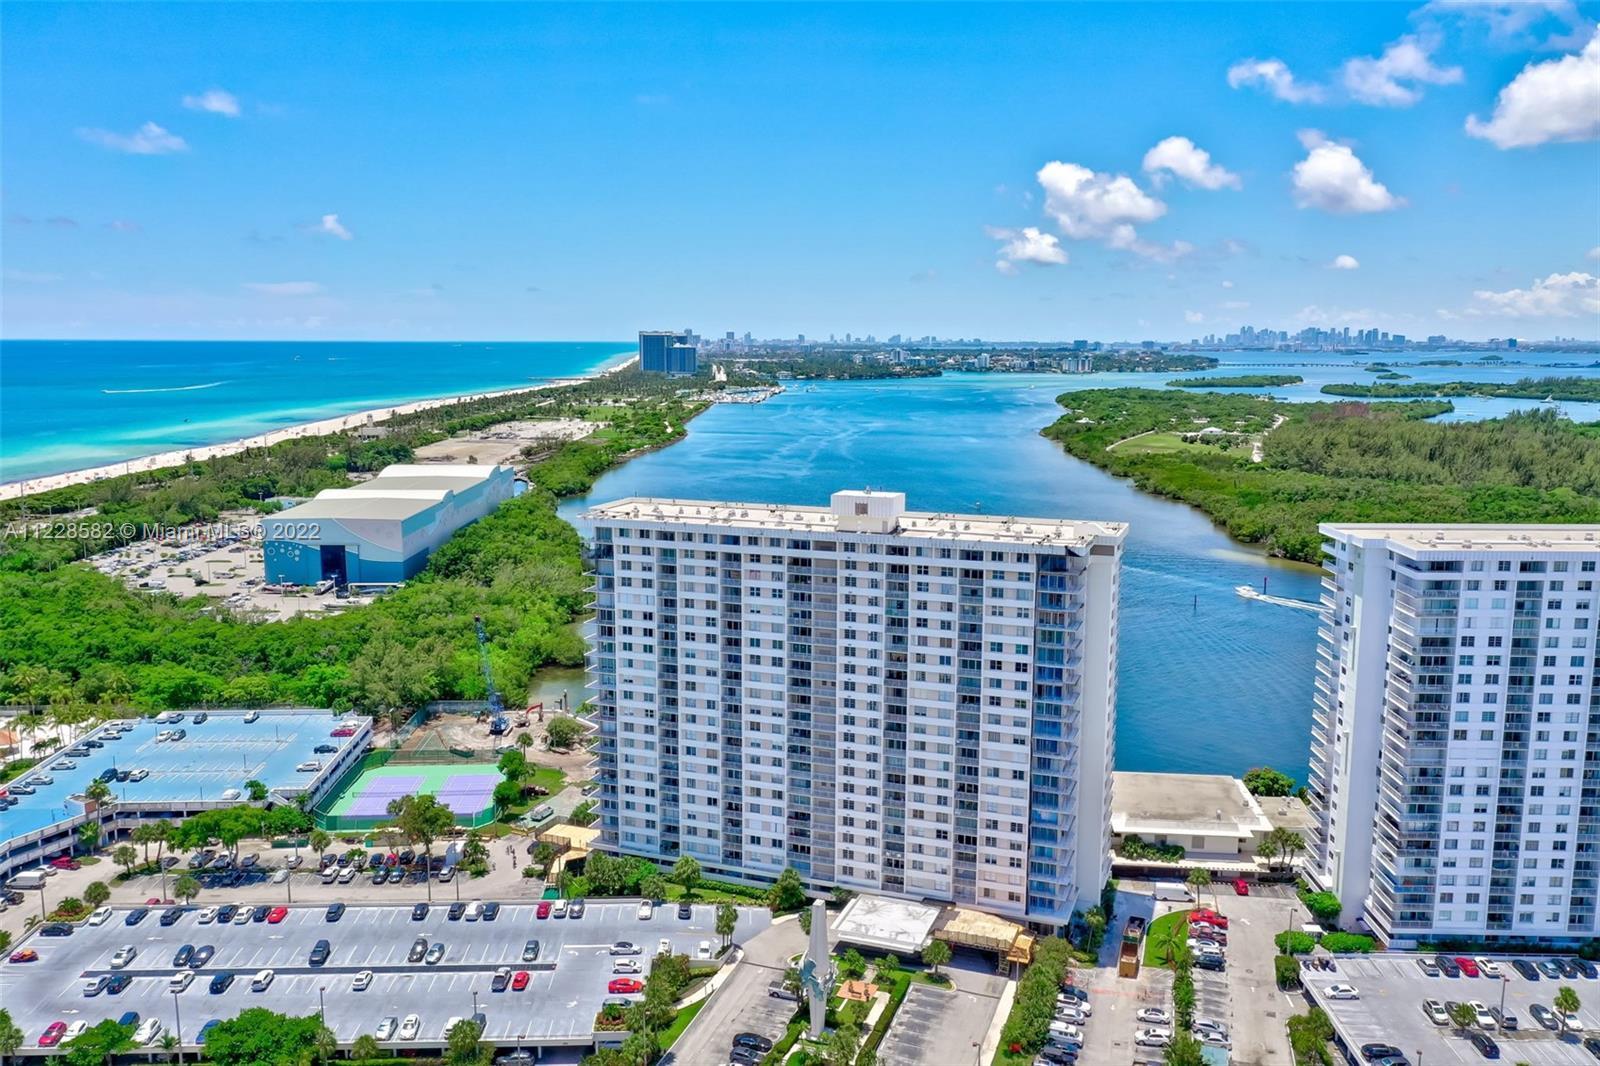 MILLION-DOLLAR WATER views as soon as you walk in the door! Spacious and bright unit has been update